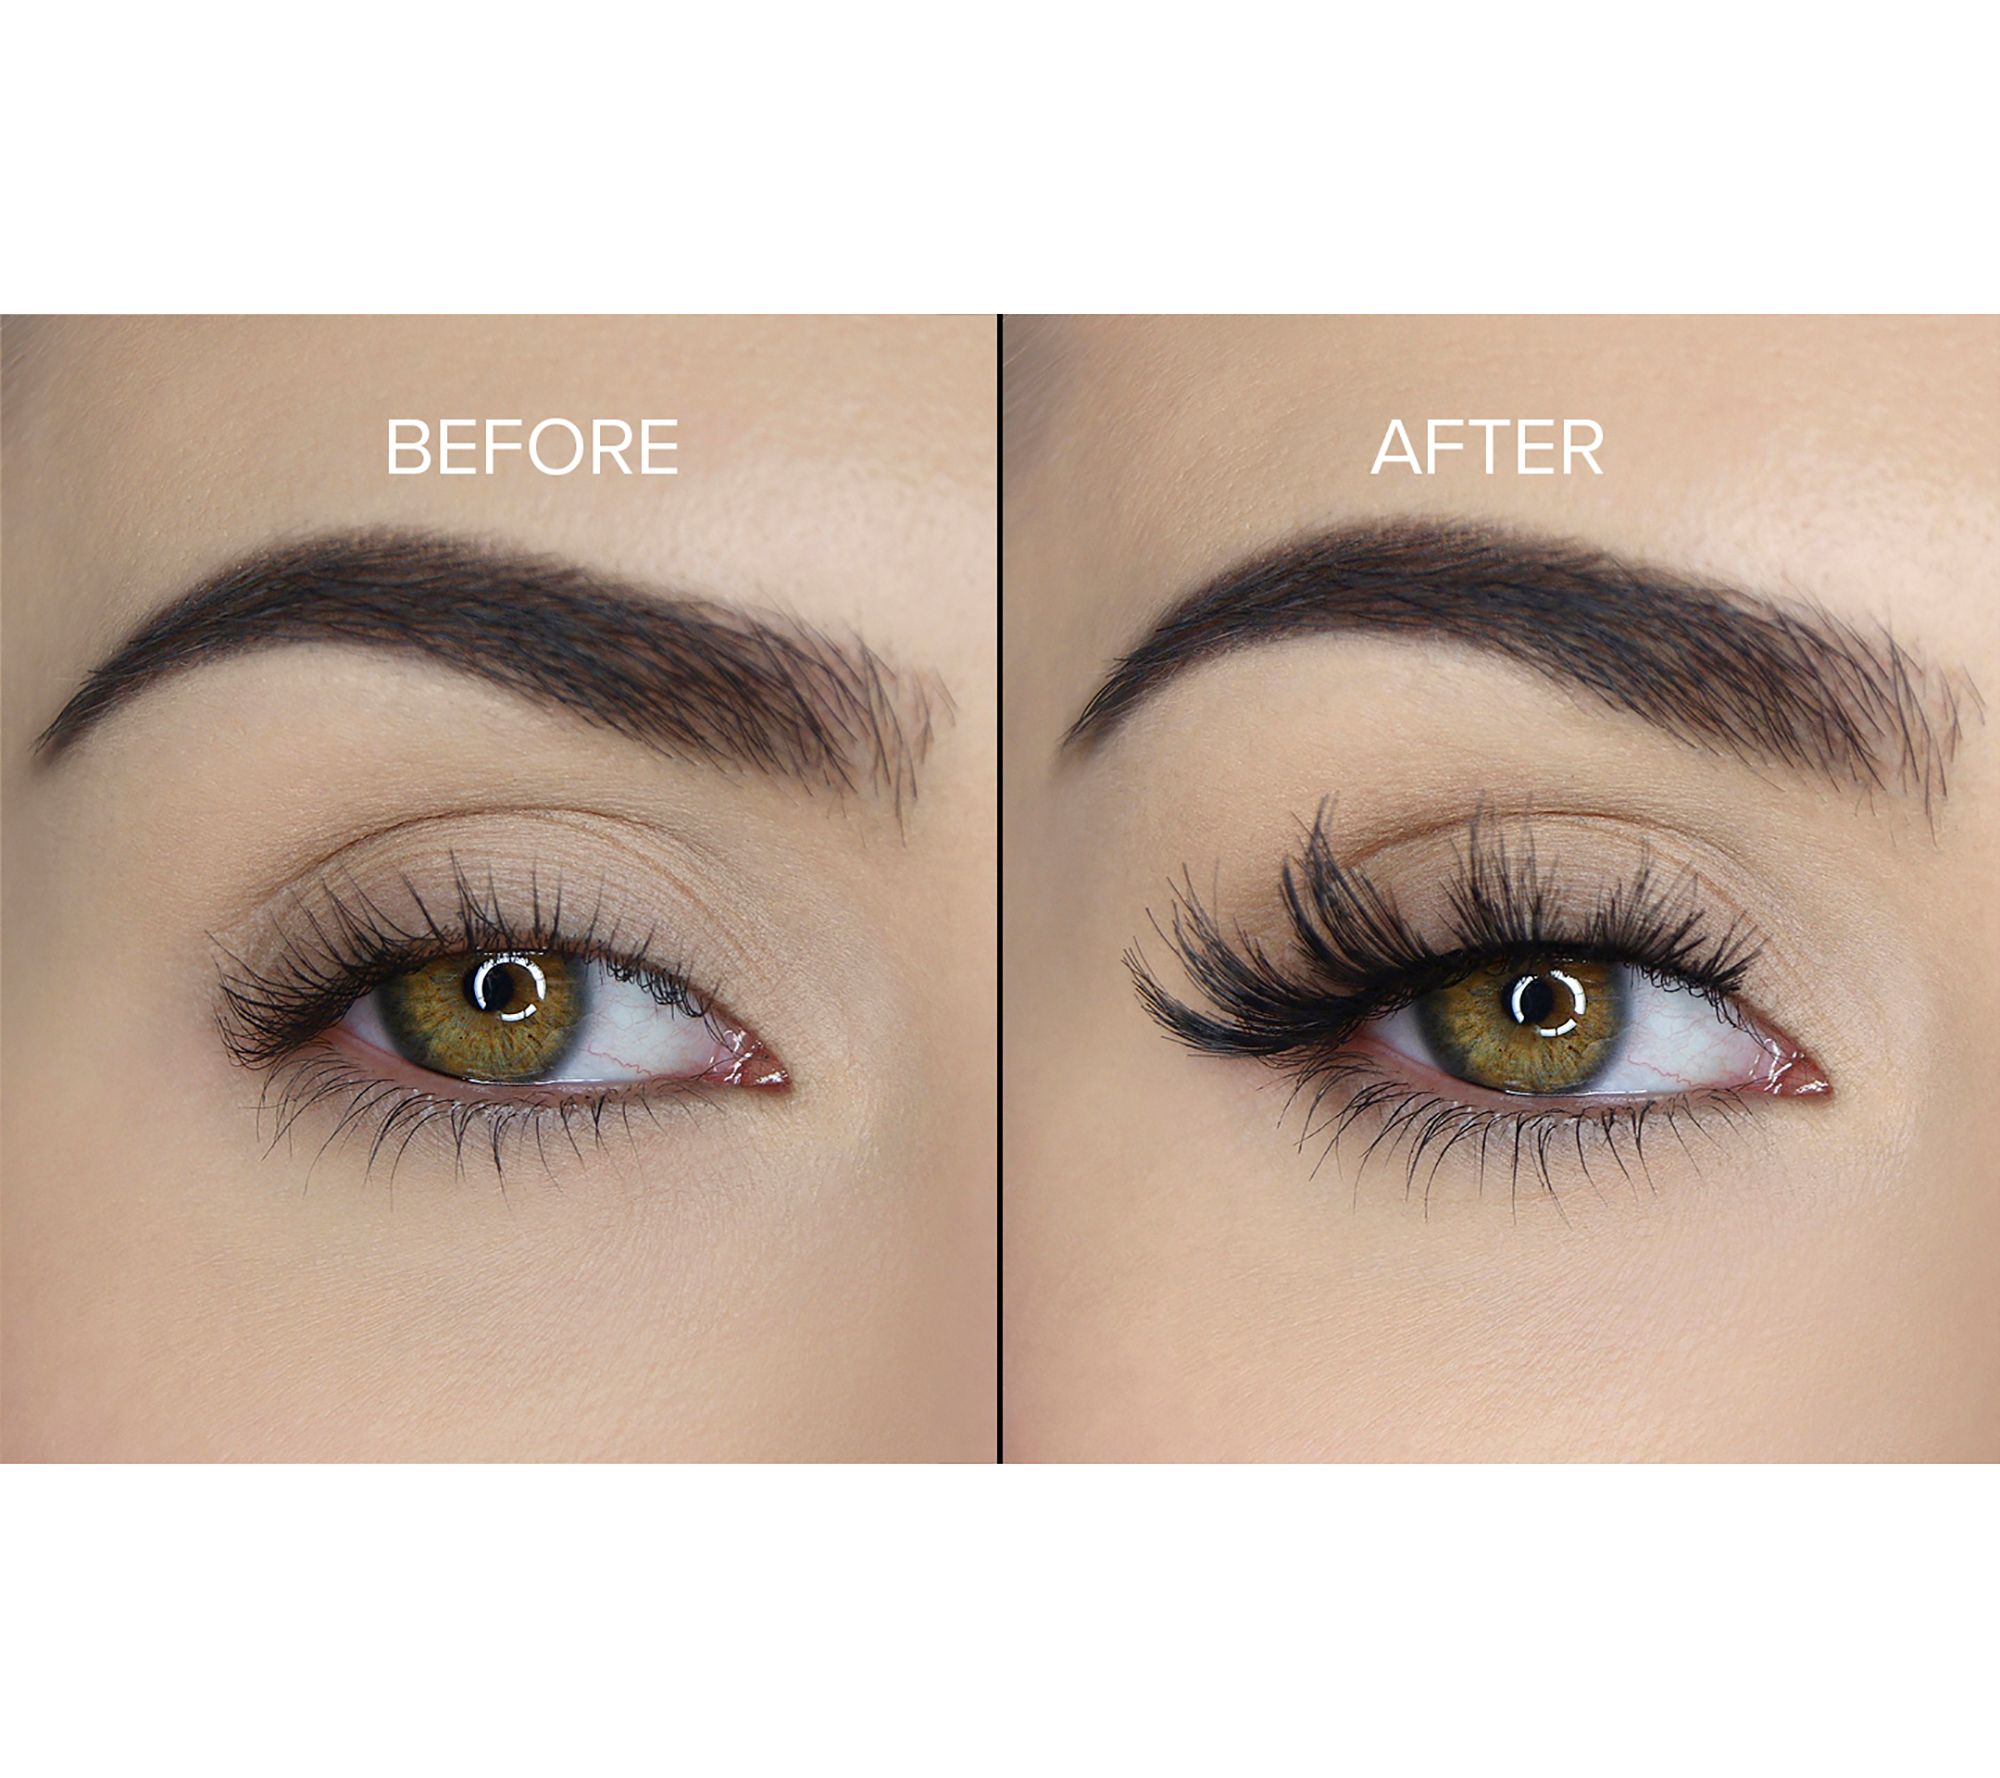 Are Doll Eye Eyelash Extensions a Good Option for You?